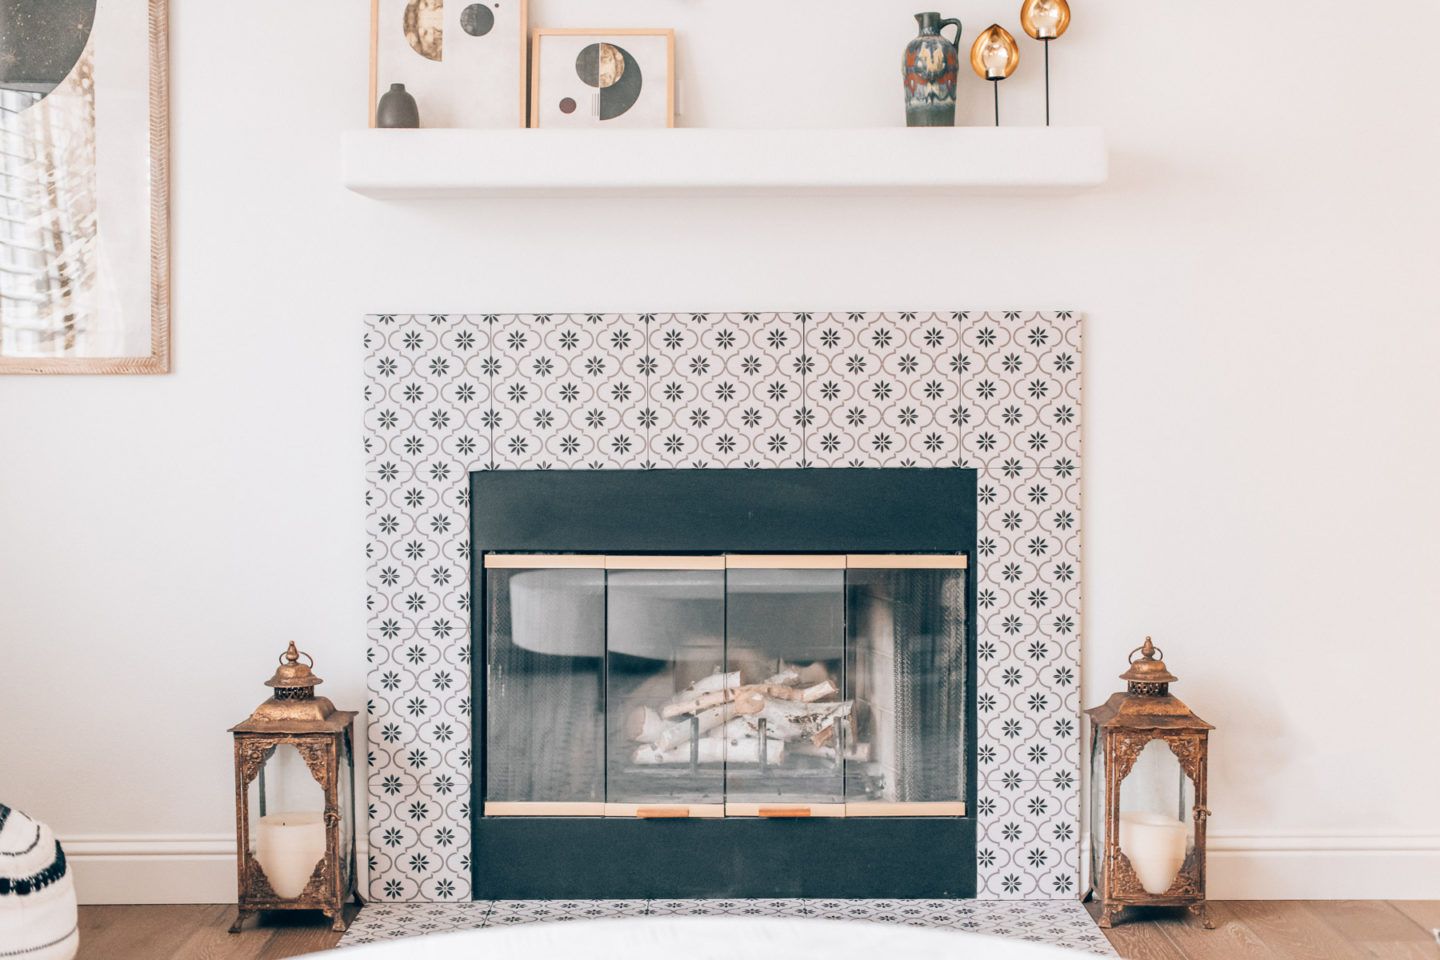 Fireplace stickers makeover, by lifestyle blogger What The Fab